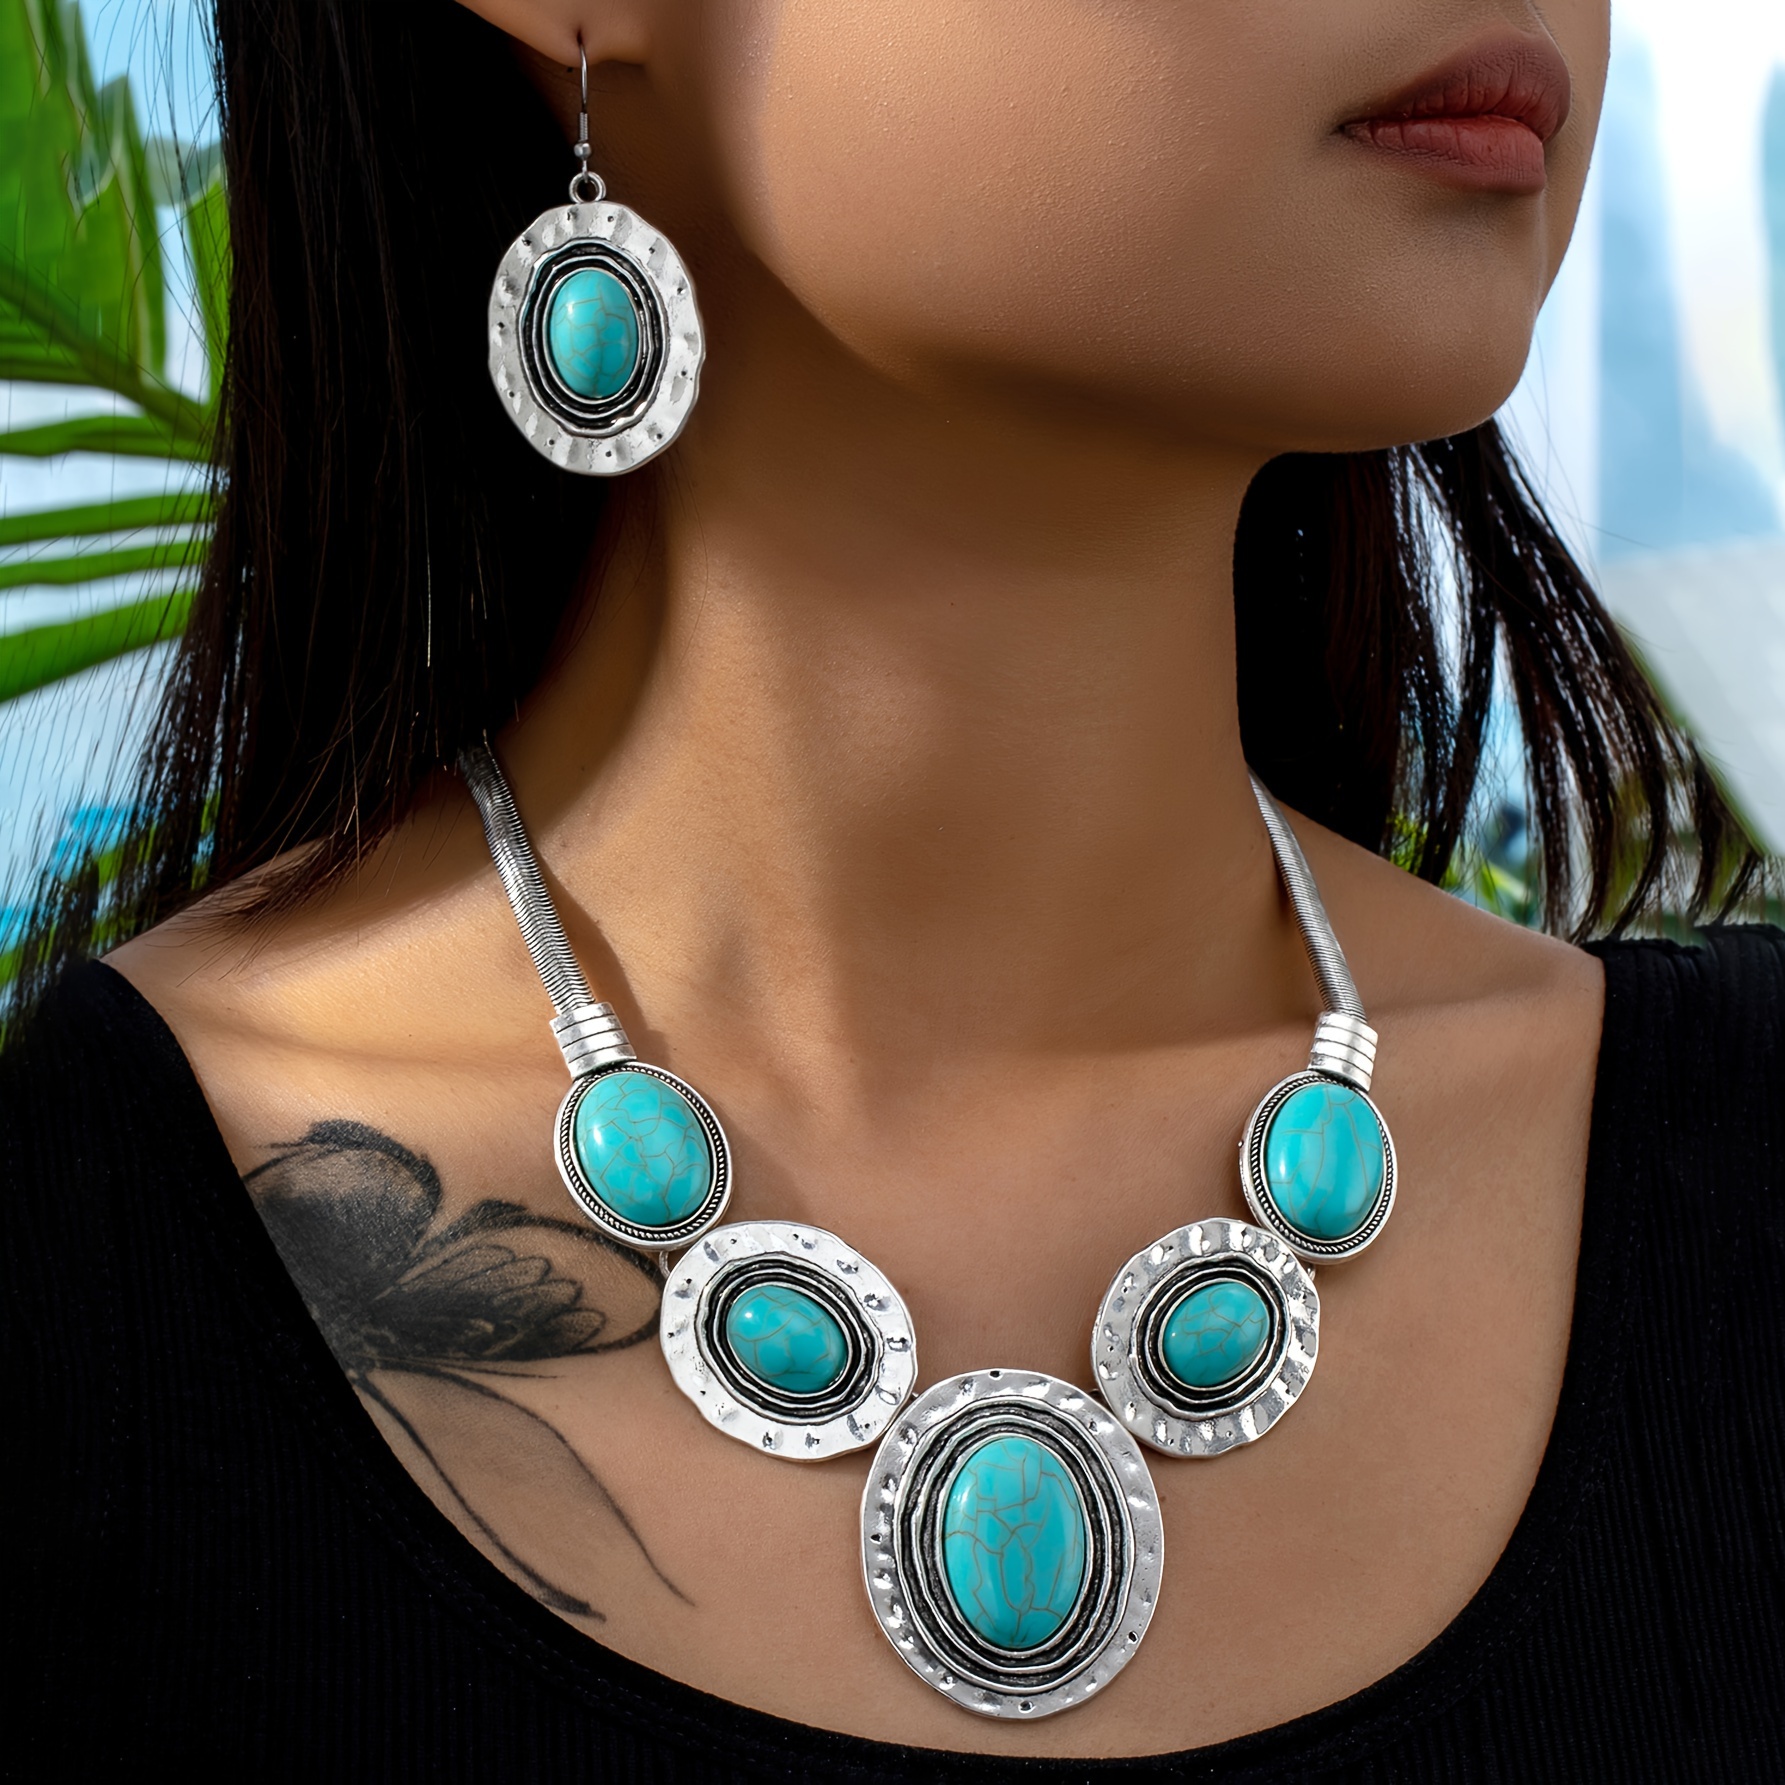 

Luxury Jewelry Set, Vintage Western Bohemian Style, Elliptical Turquoise Pendant & Earrings, Bold Statement Snake Chain Necklace And Earrings Set, Delicate Accessory For Ladies